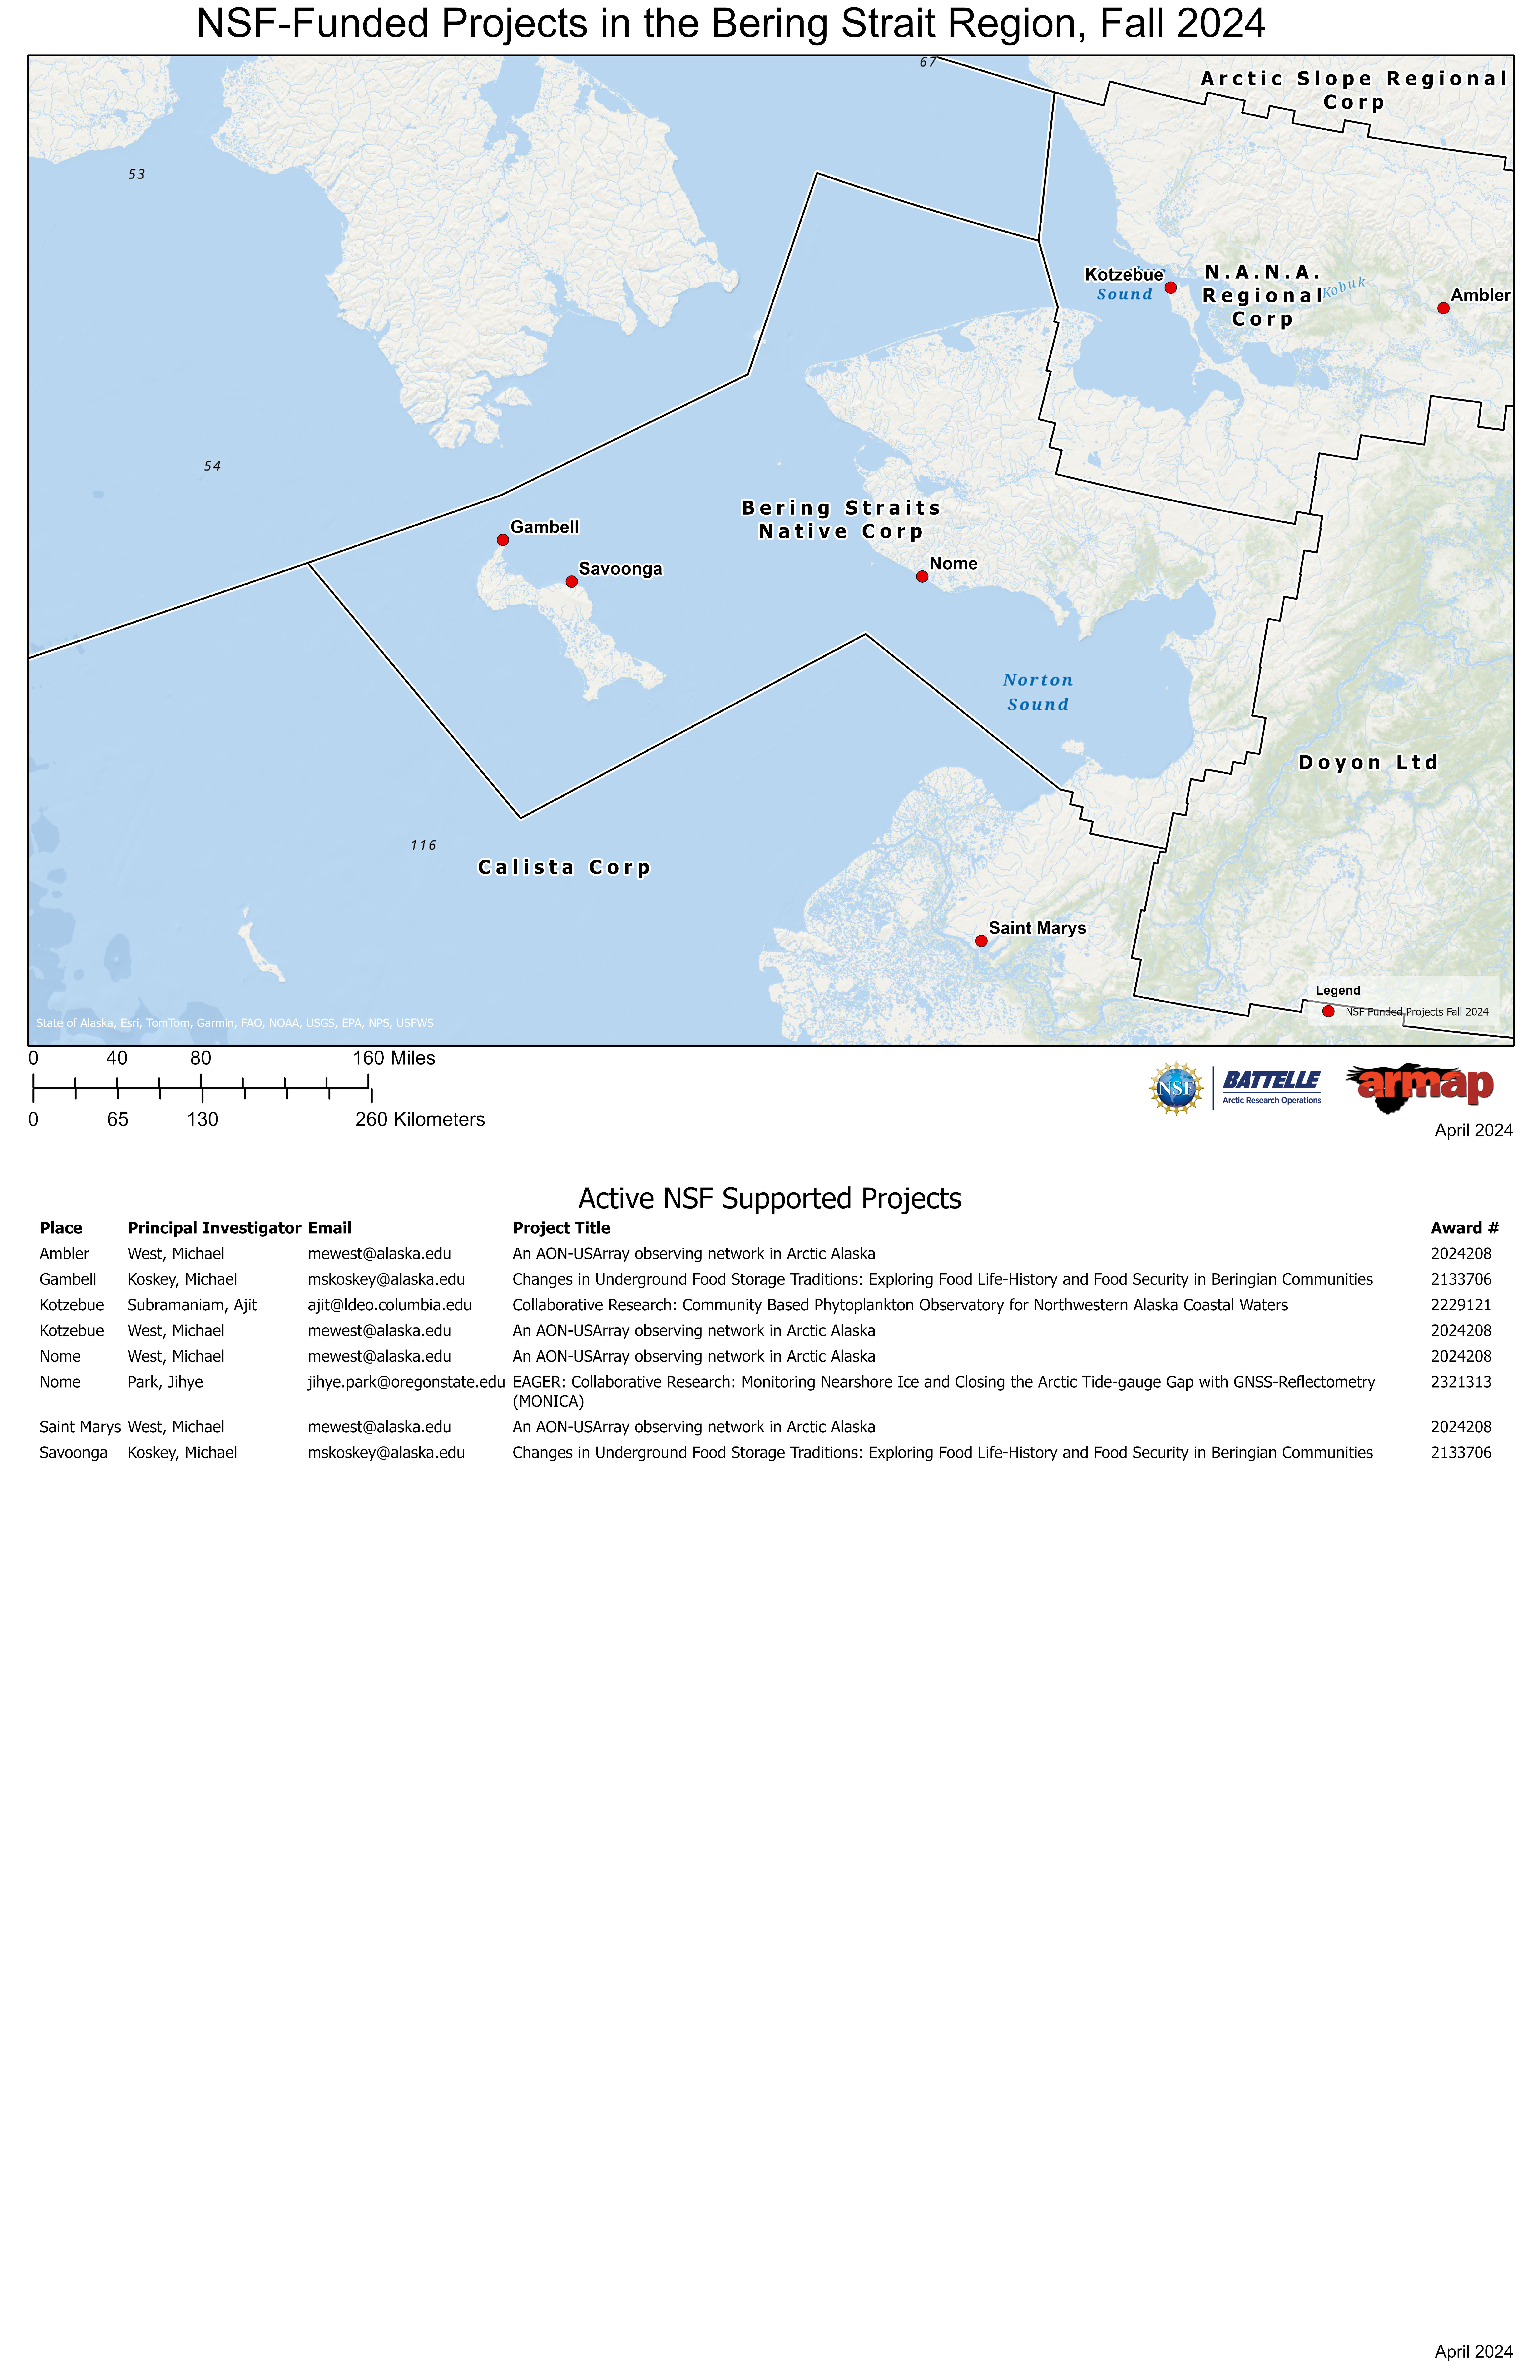 NSF-Funded Projects in the Bering Strait Region, Fall of this Year